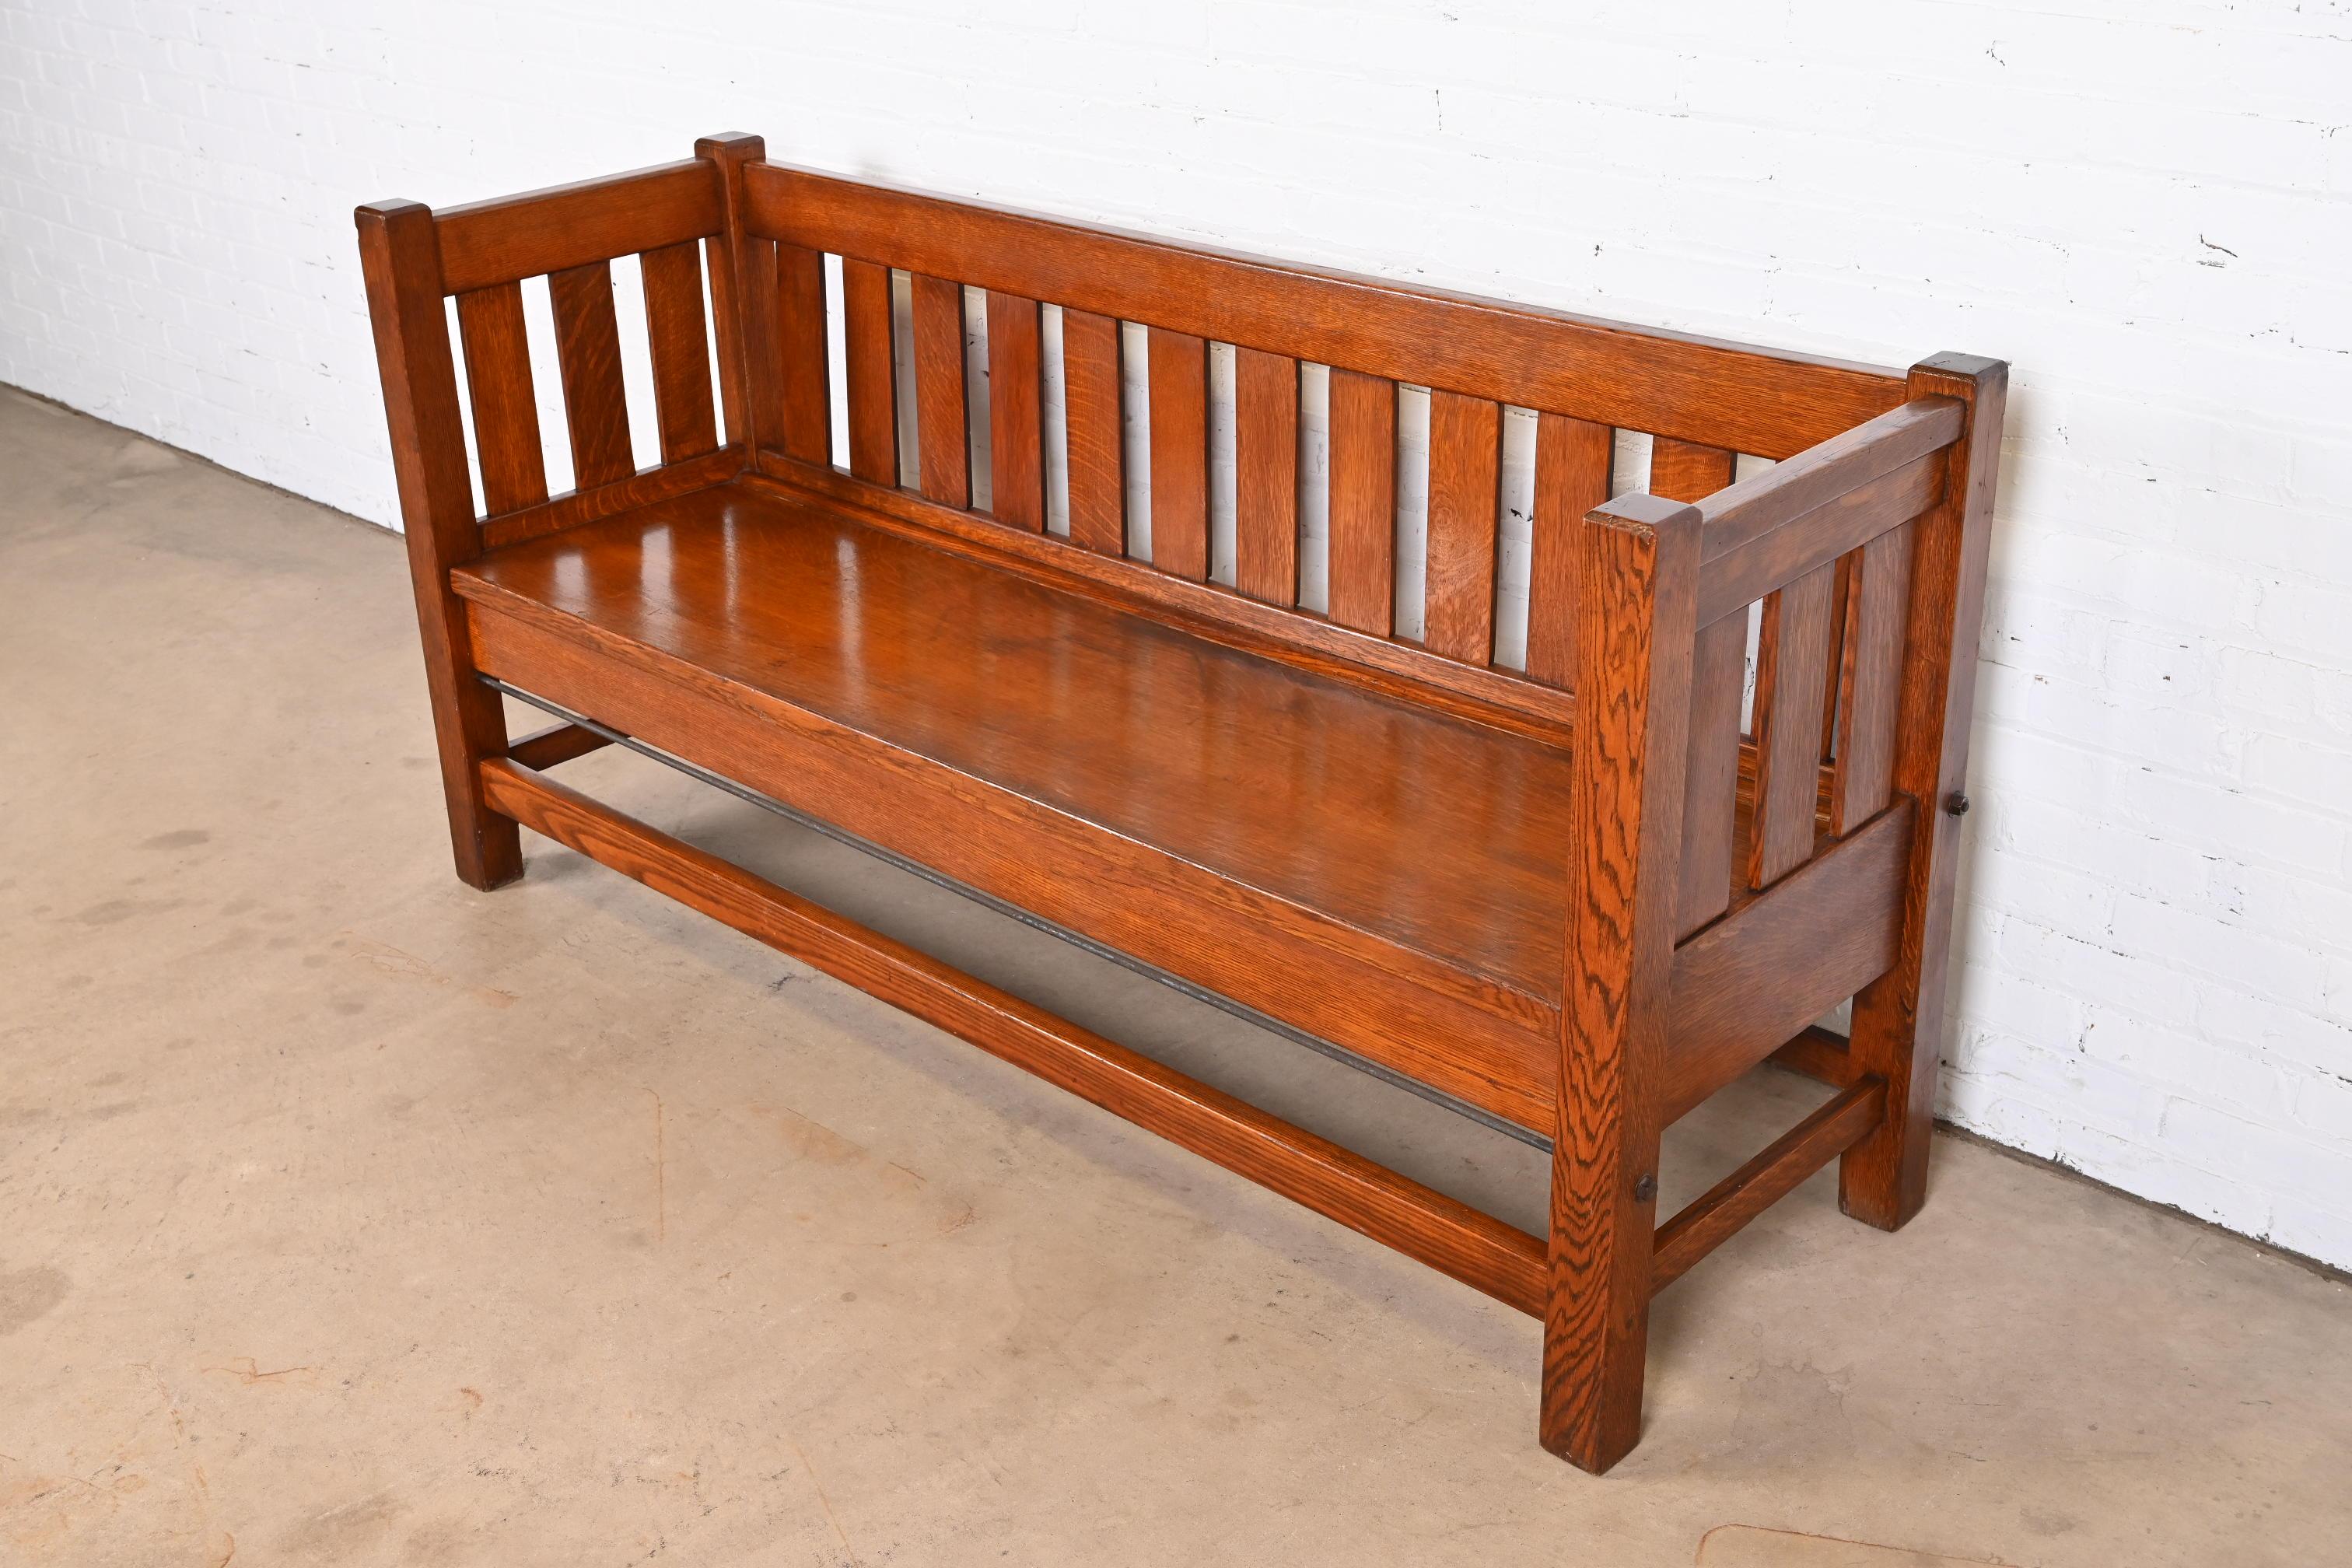 American Antique Stickley Style Mission Oak Arts & Crafts Settle Sofa or Bench